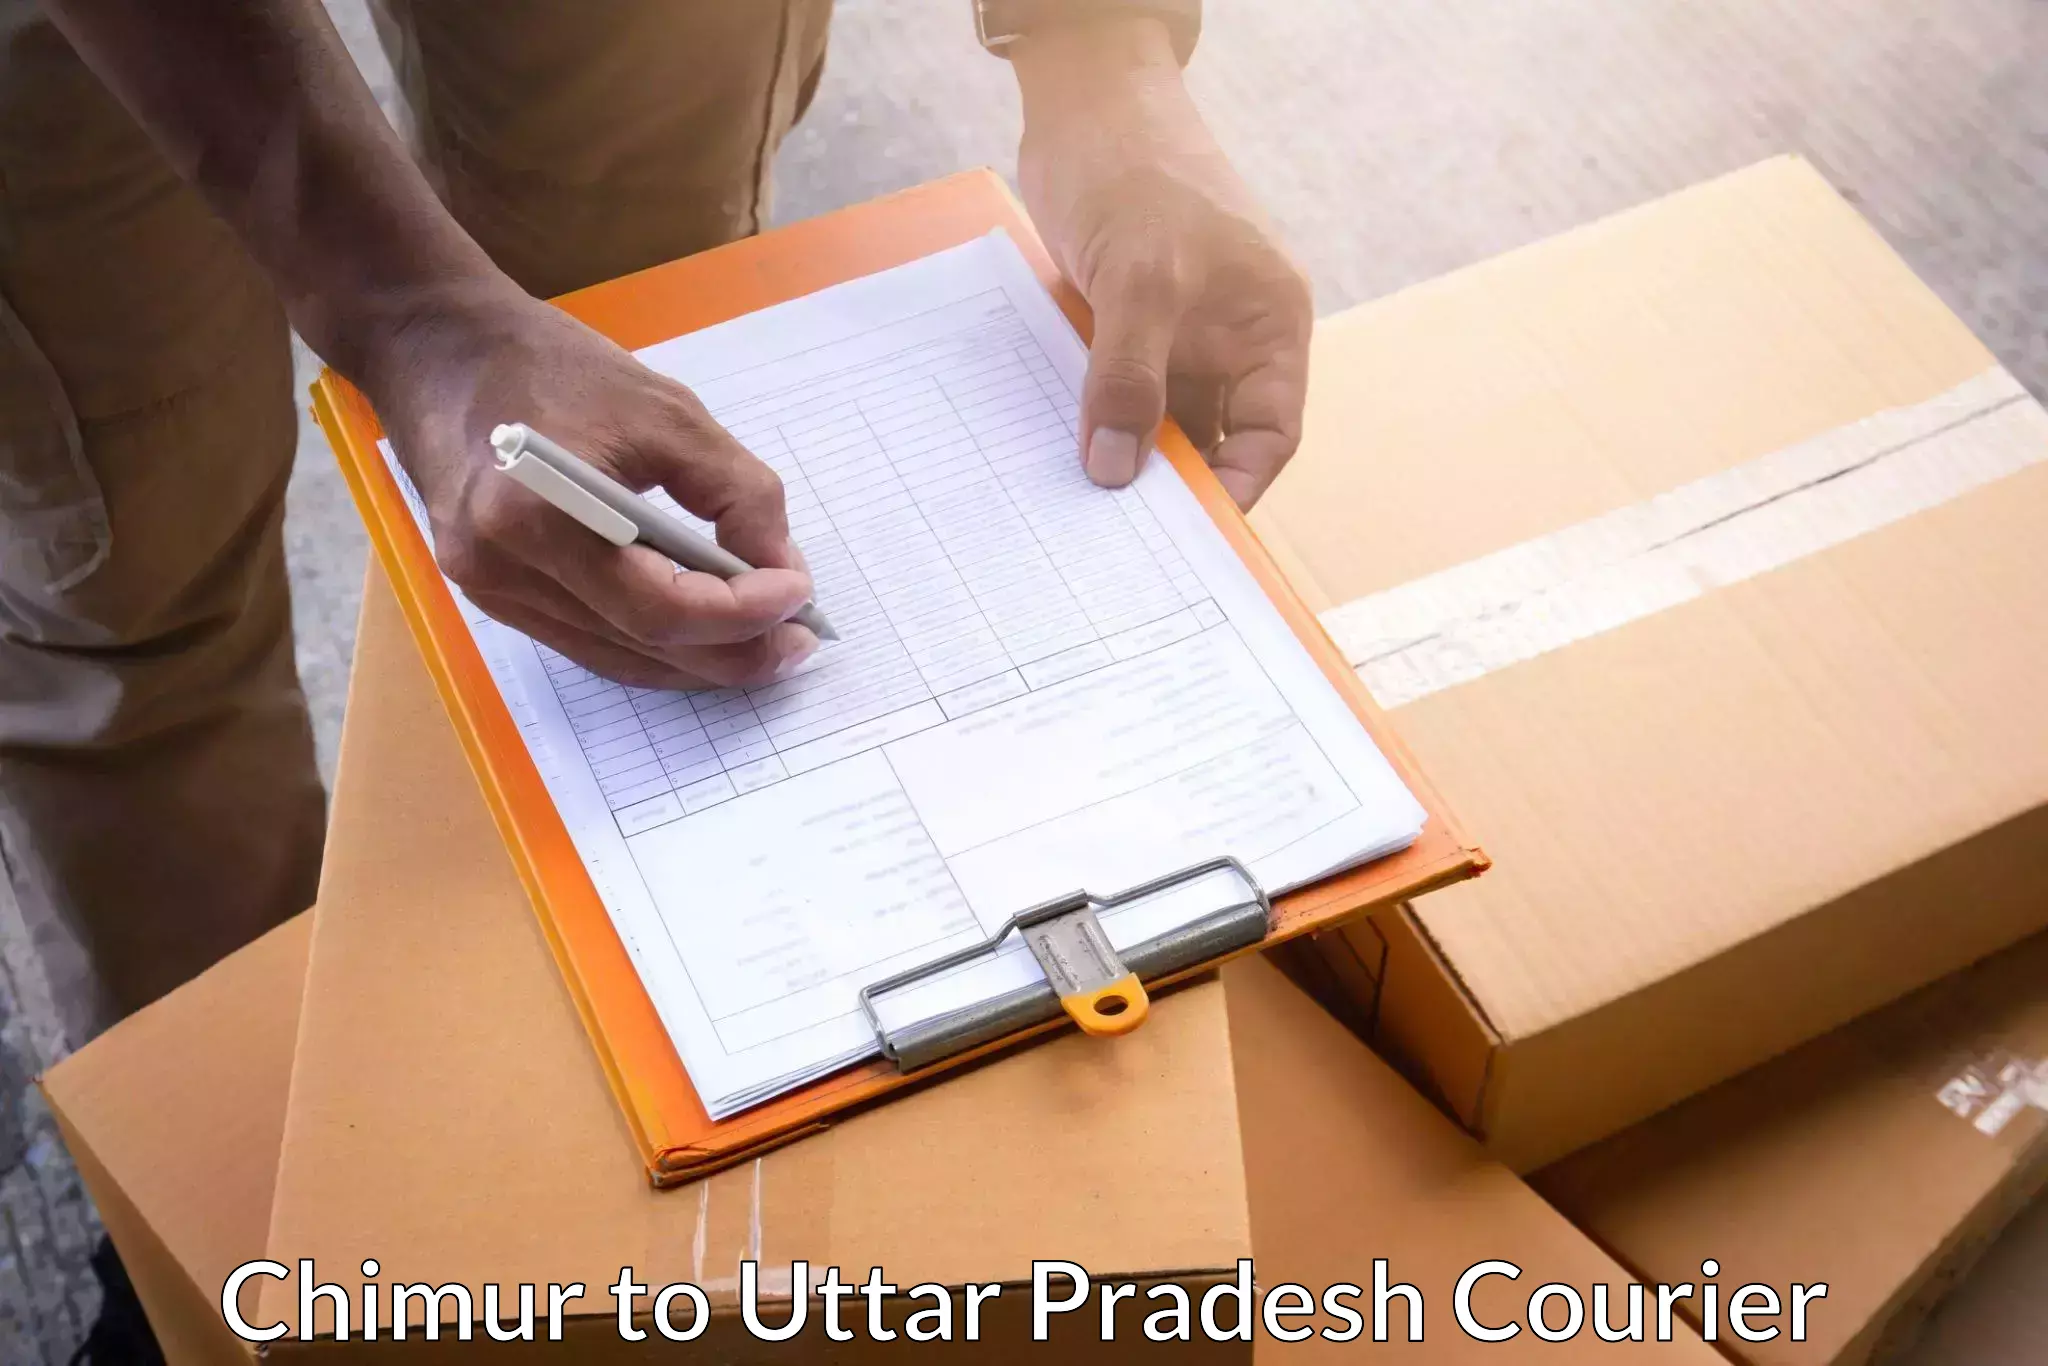 State-of-the-art courier technology Chimur to Sikandra Rao